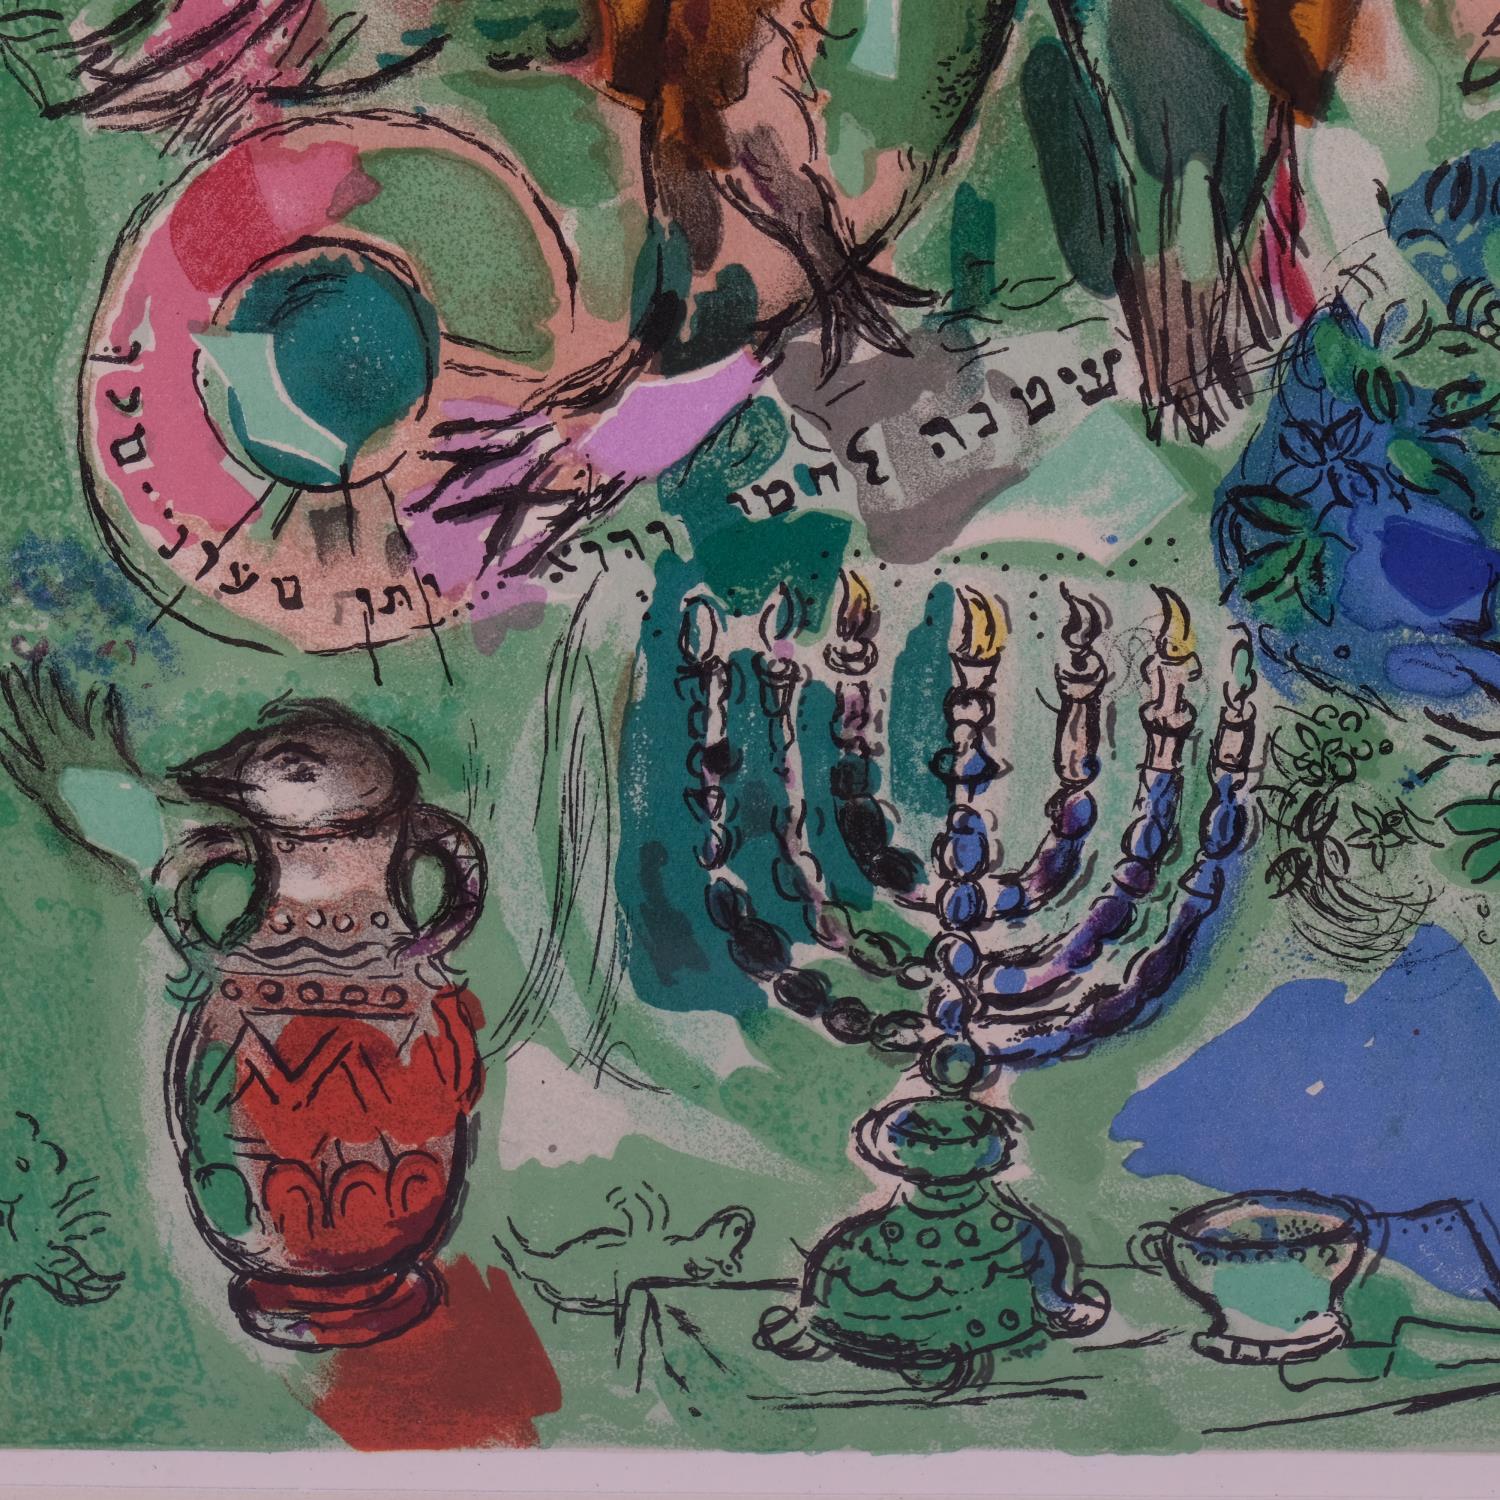 Marc Chagall/C Sorlier, window design, lithograph 1962, small version, image 29cm x 21cm, framed - Image 3 of 4